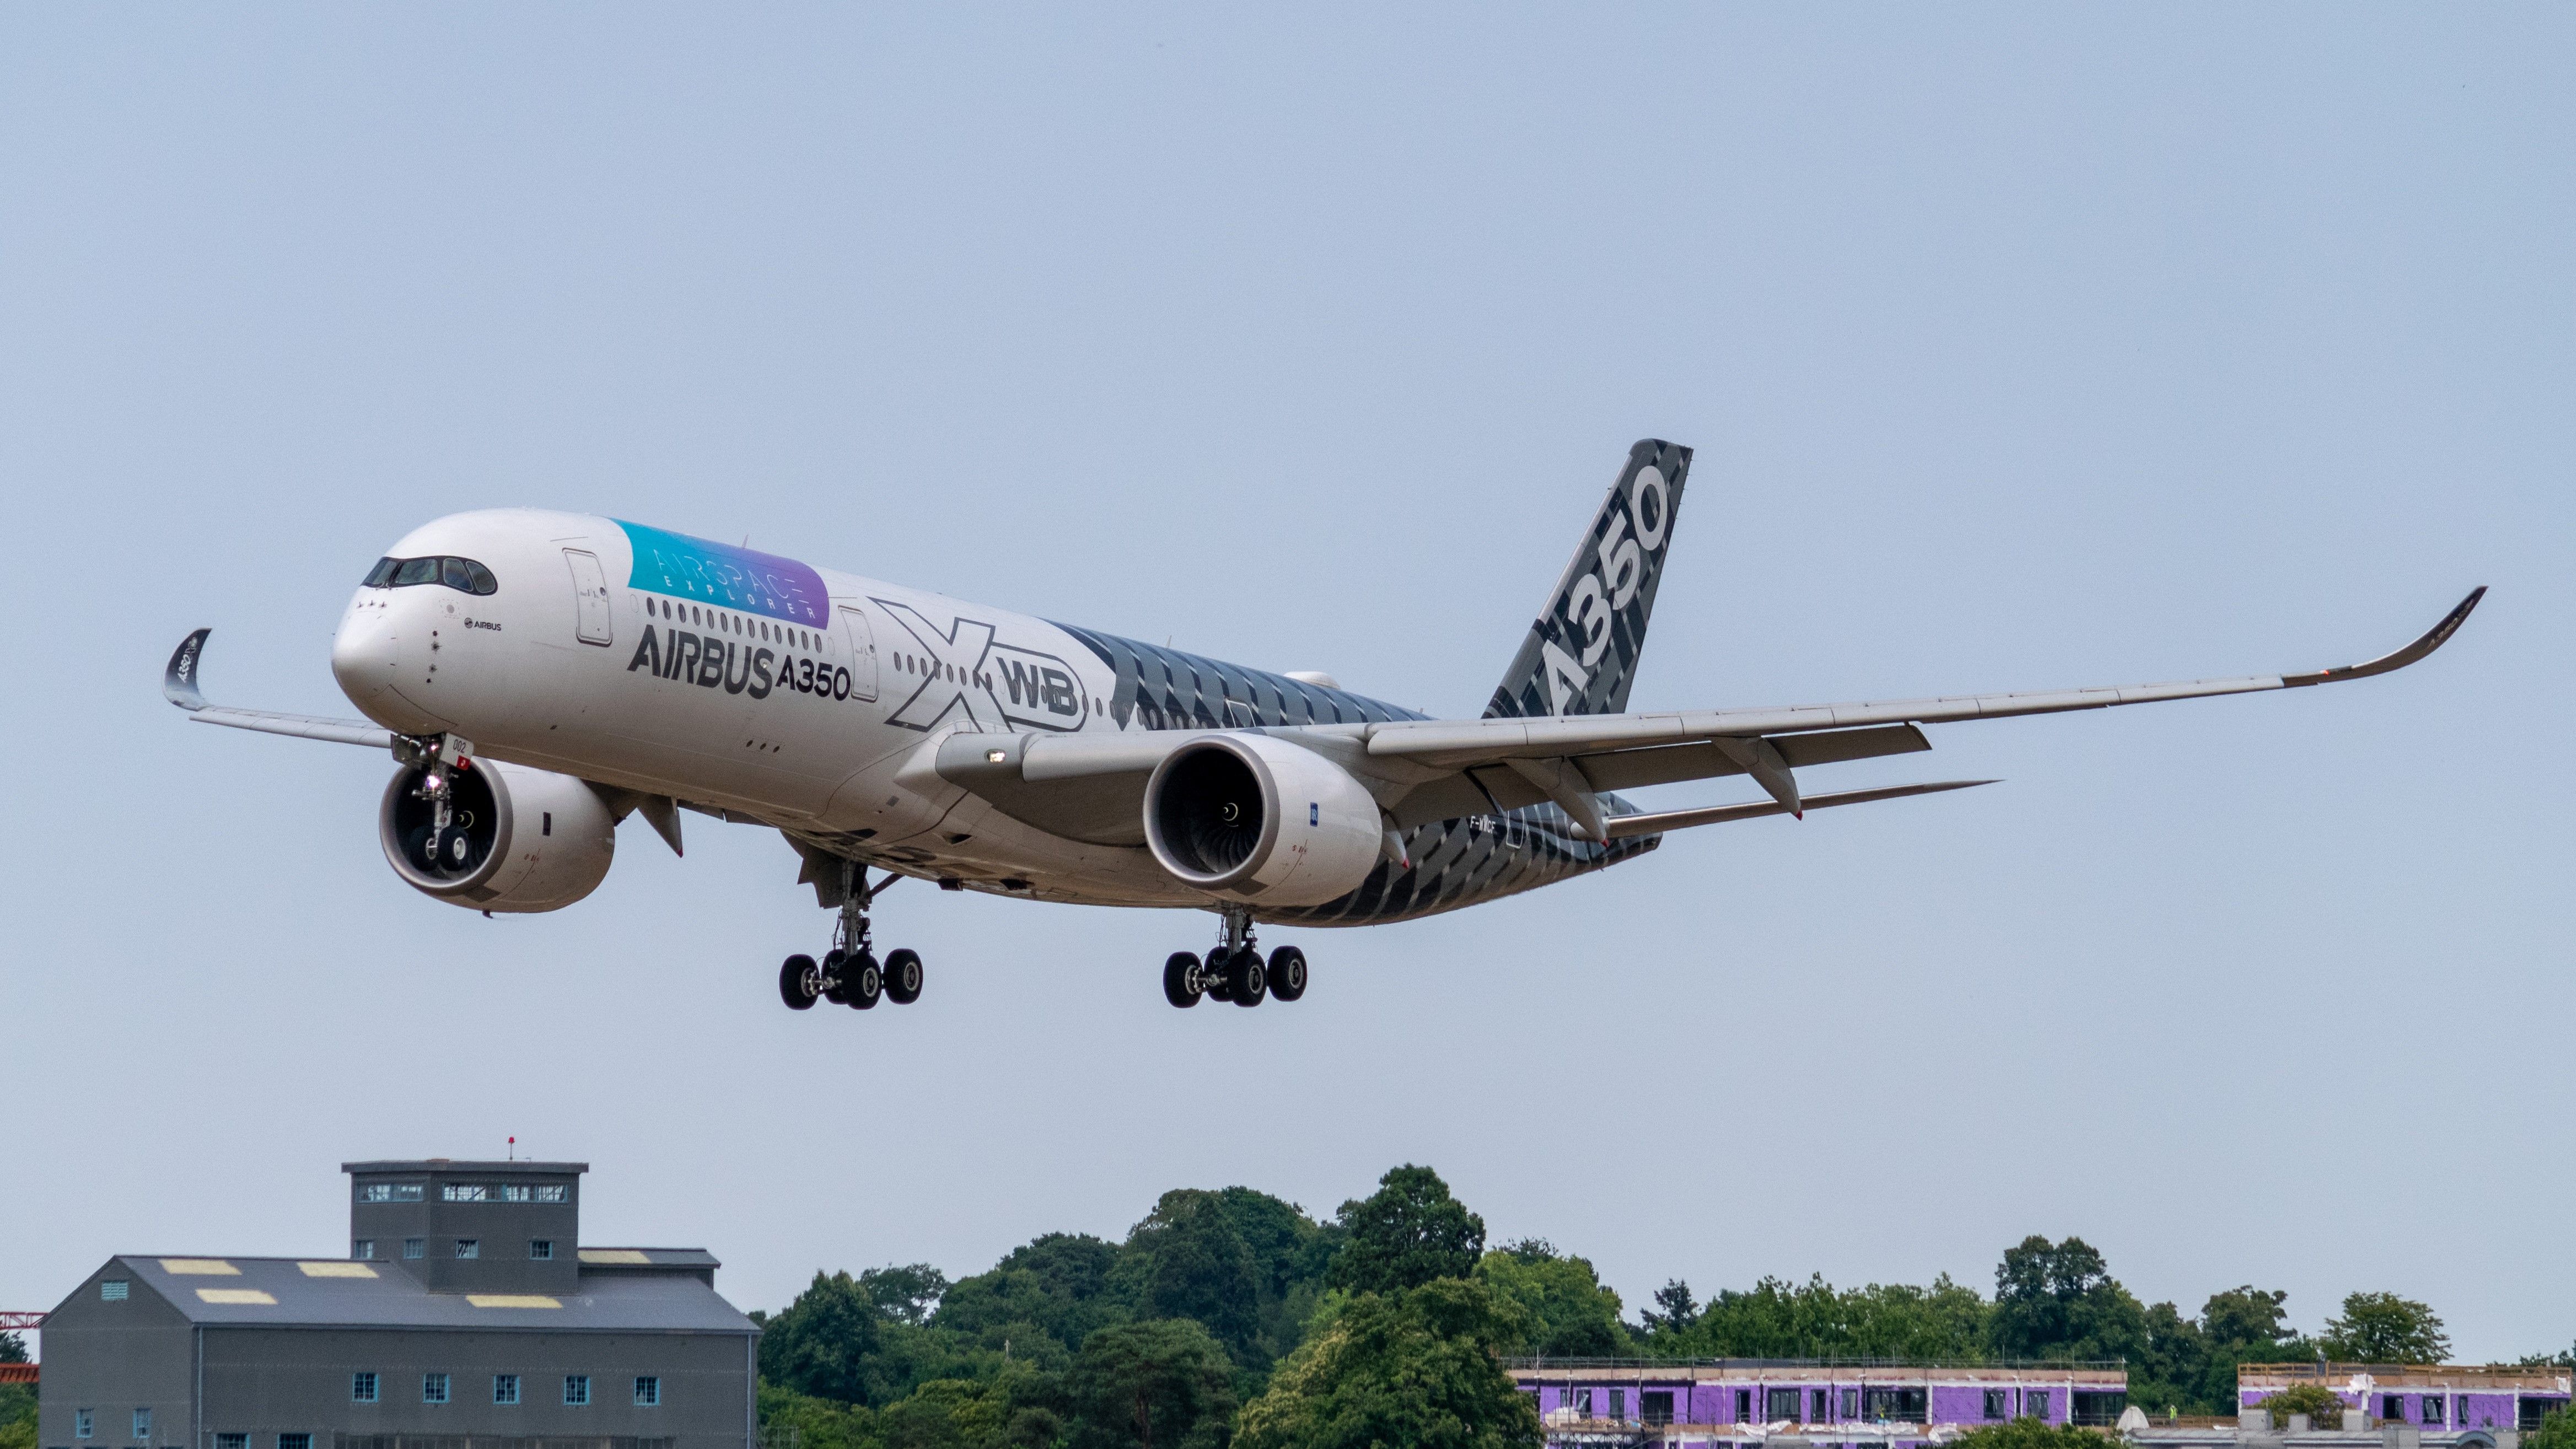 Airbus livery A350 coming in to land